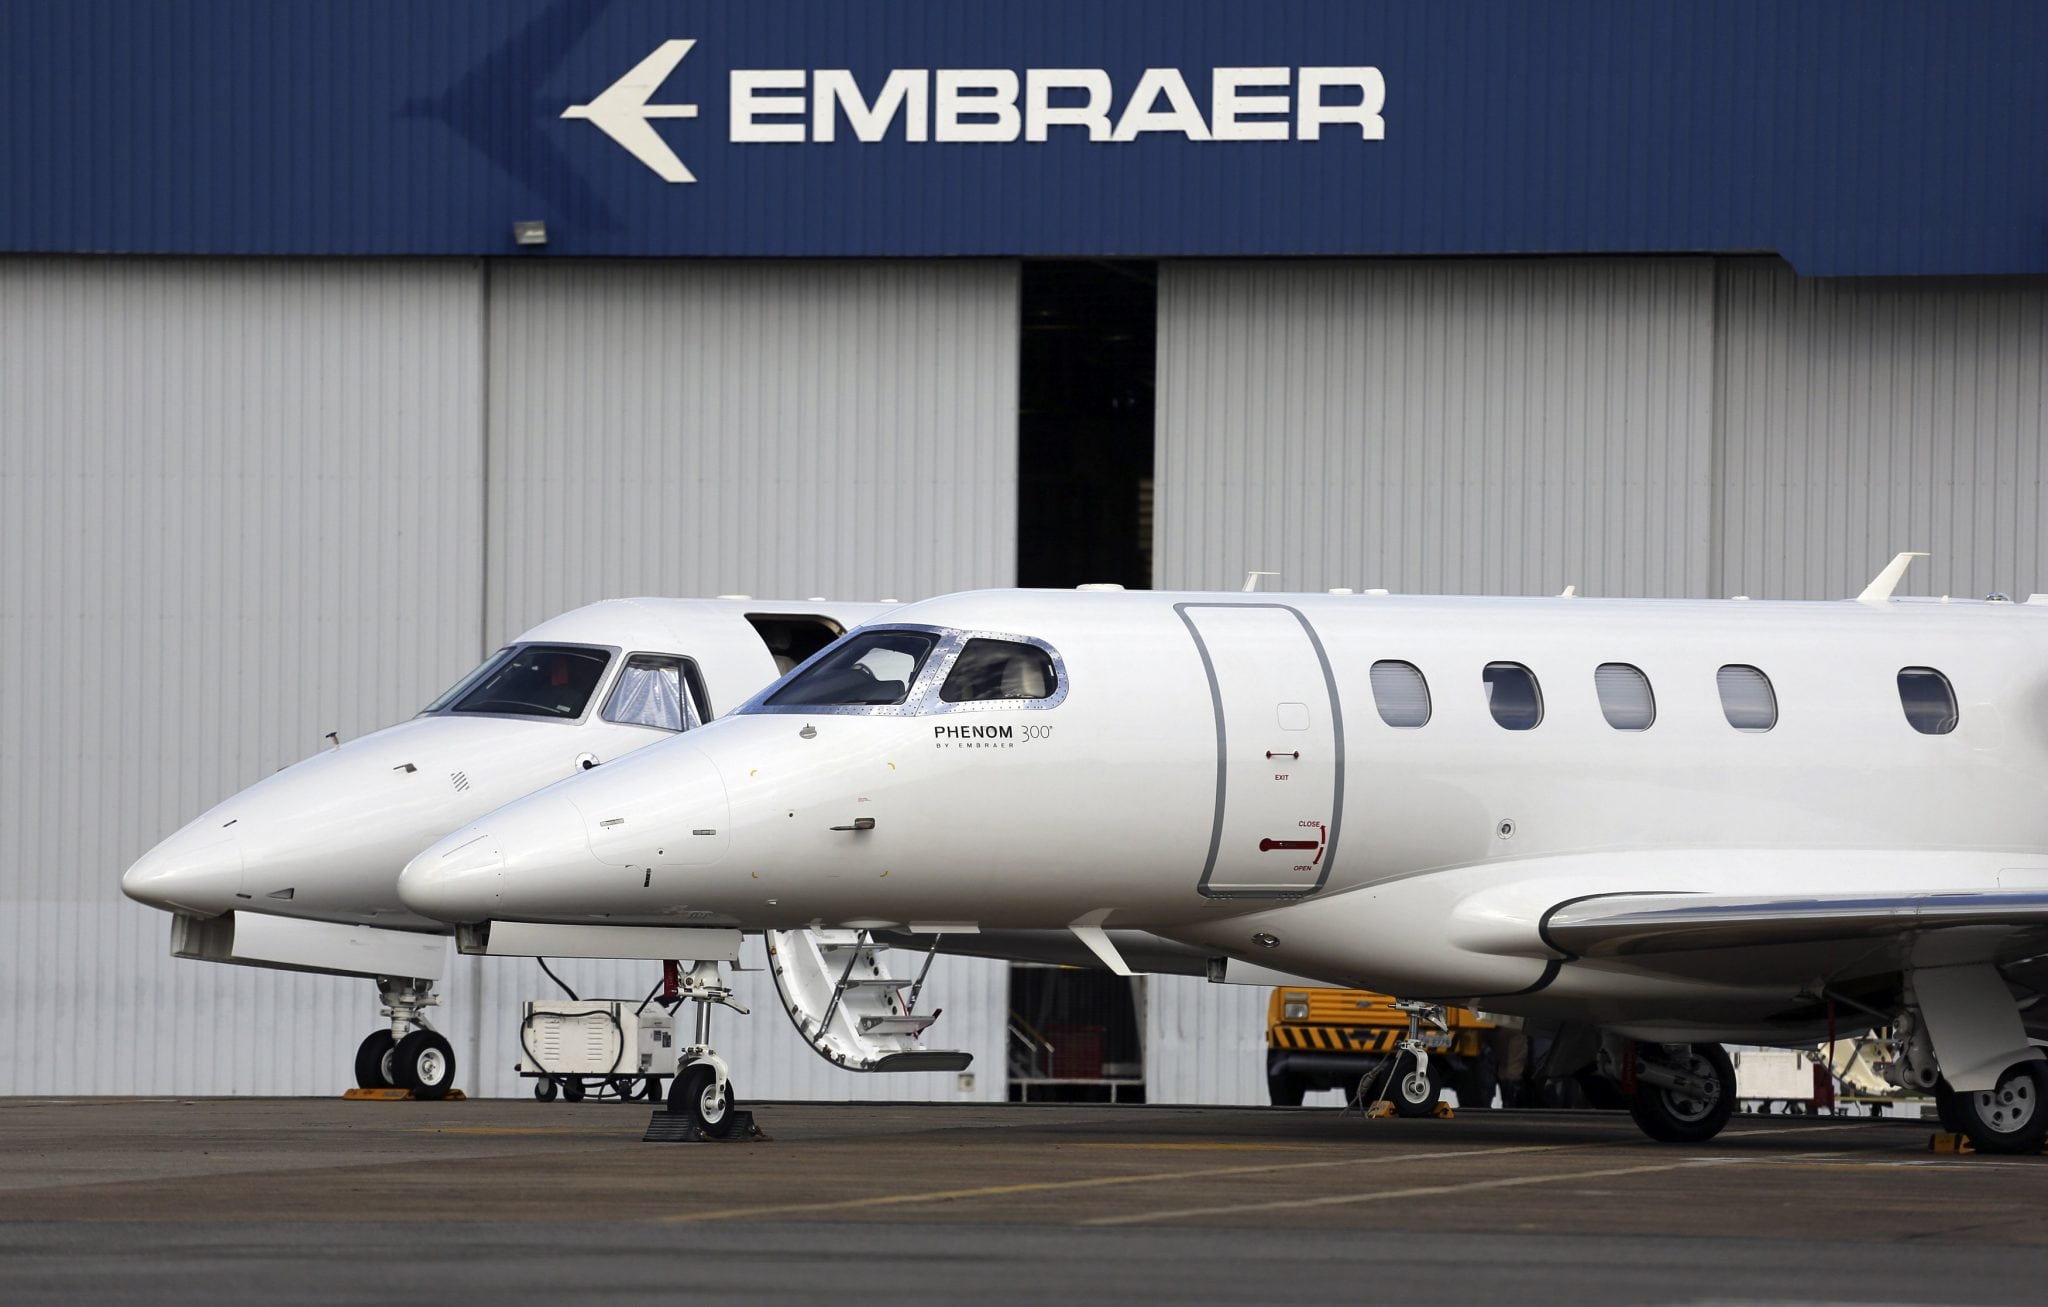 Private jets are seen at the Embraer headquarters in Sao Jose dos Campos. 